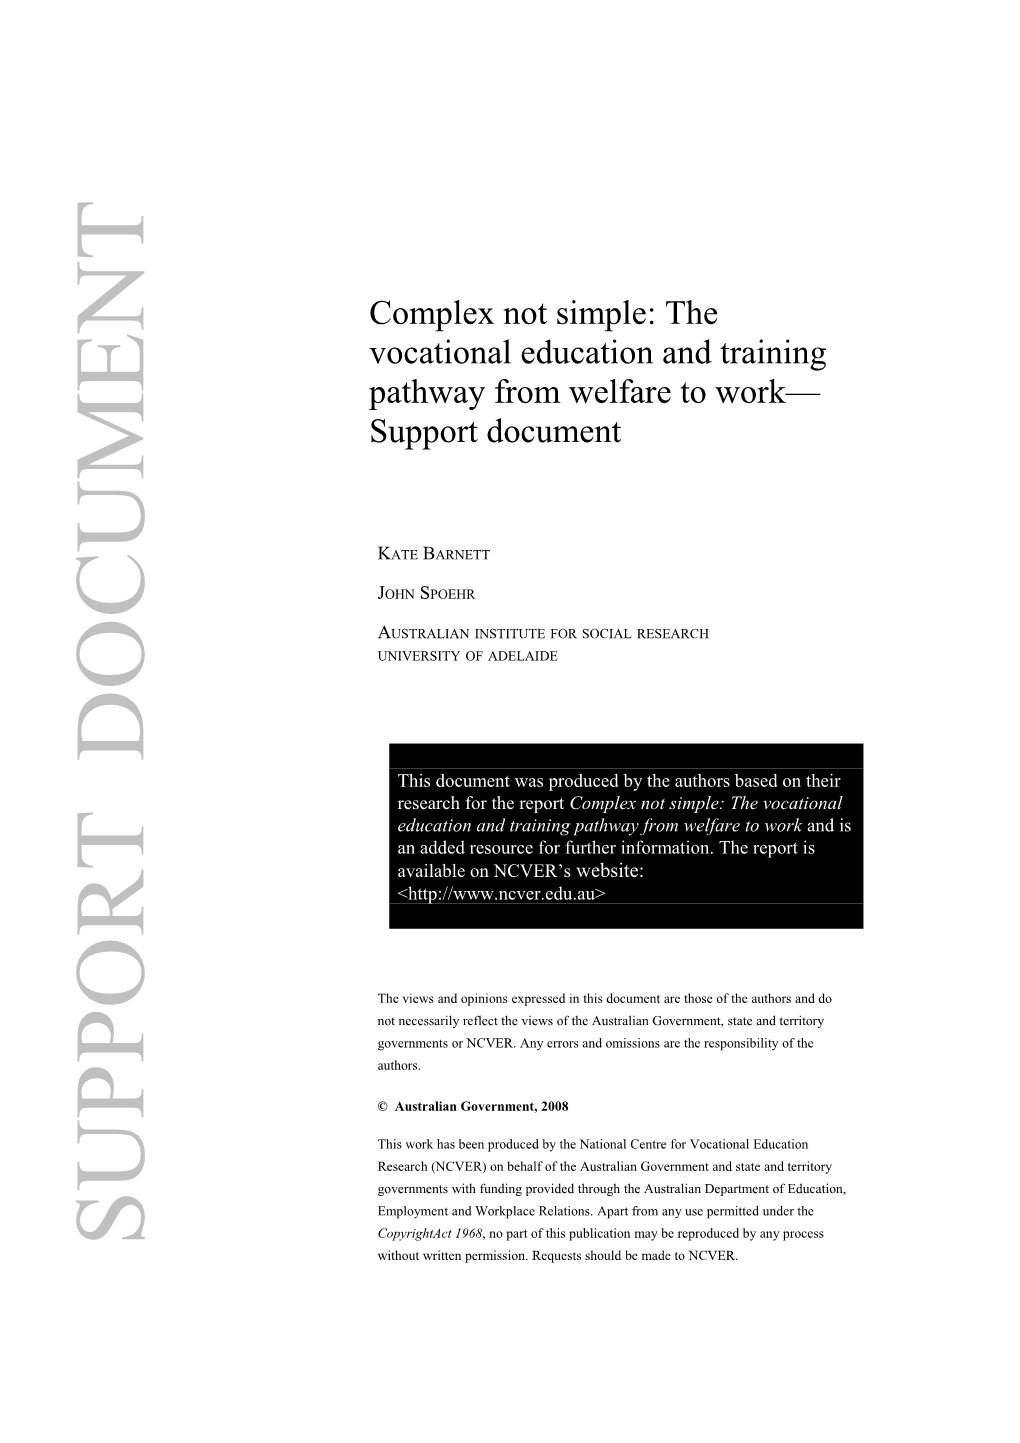 Complex Not Simple: the Vocational Education and Training Pathway from Welfare to Work